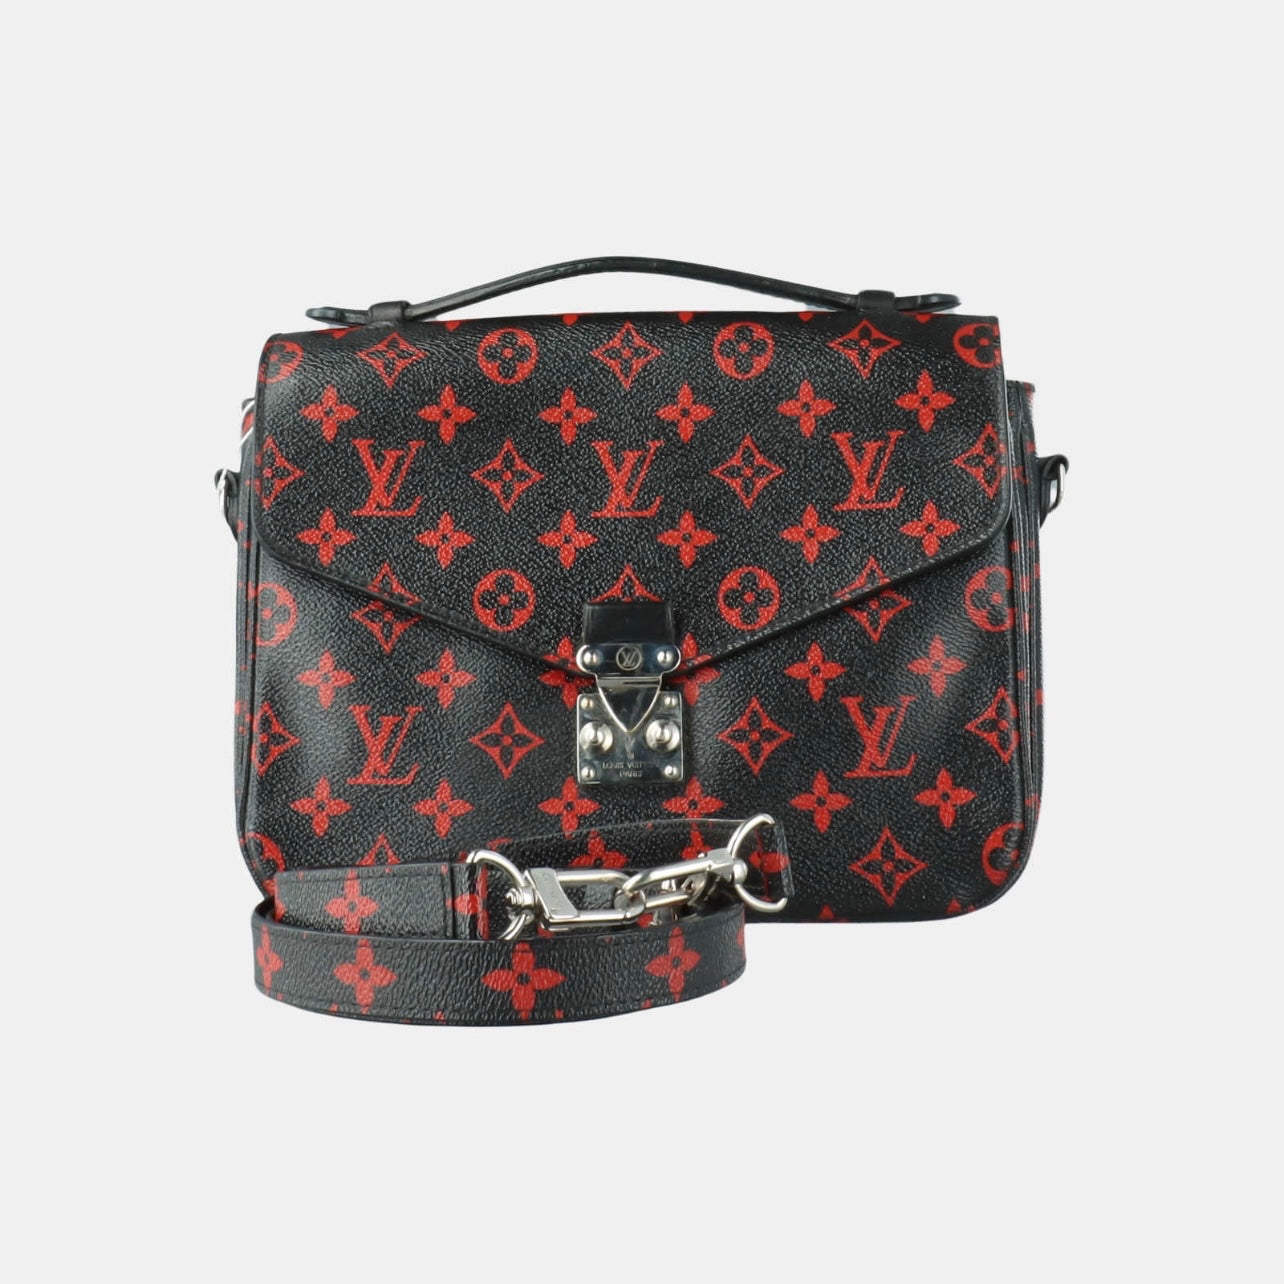 Louis Vuitton Launches Red and Black Monogram Infrarouge Collection -  Spotted Fashion